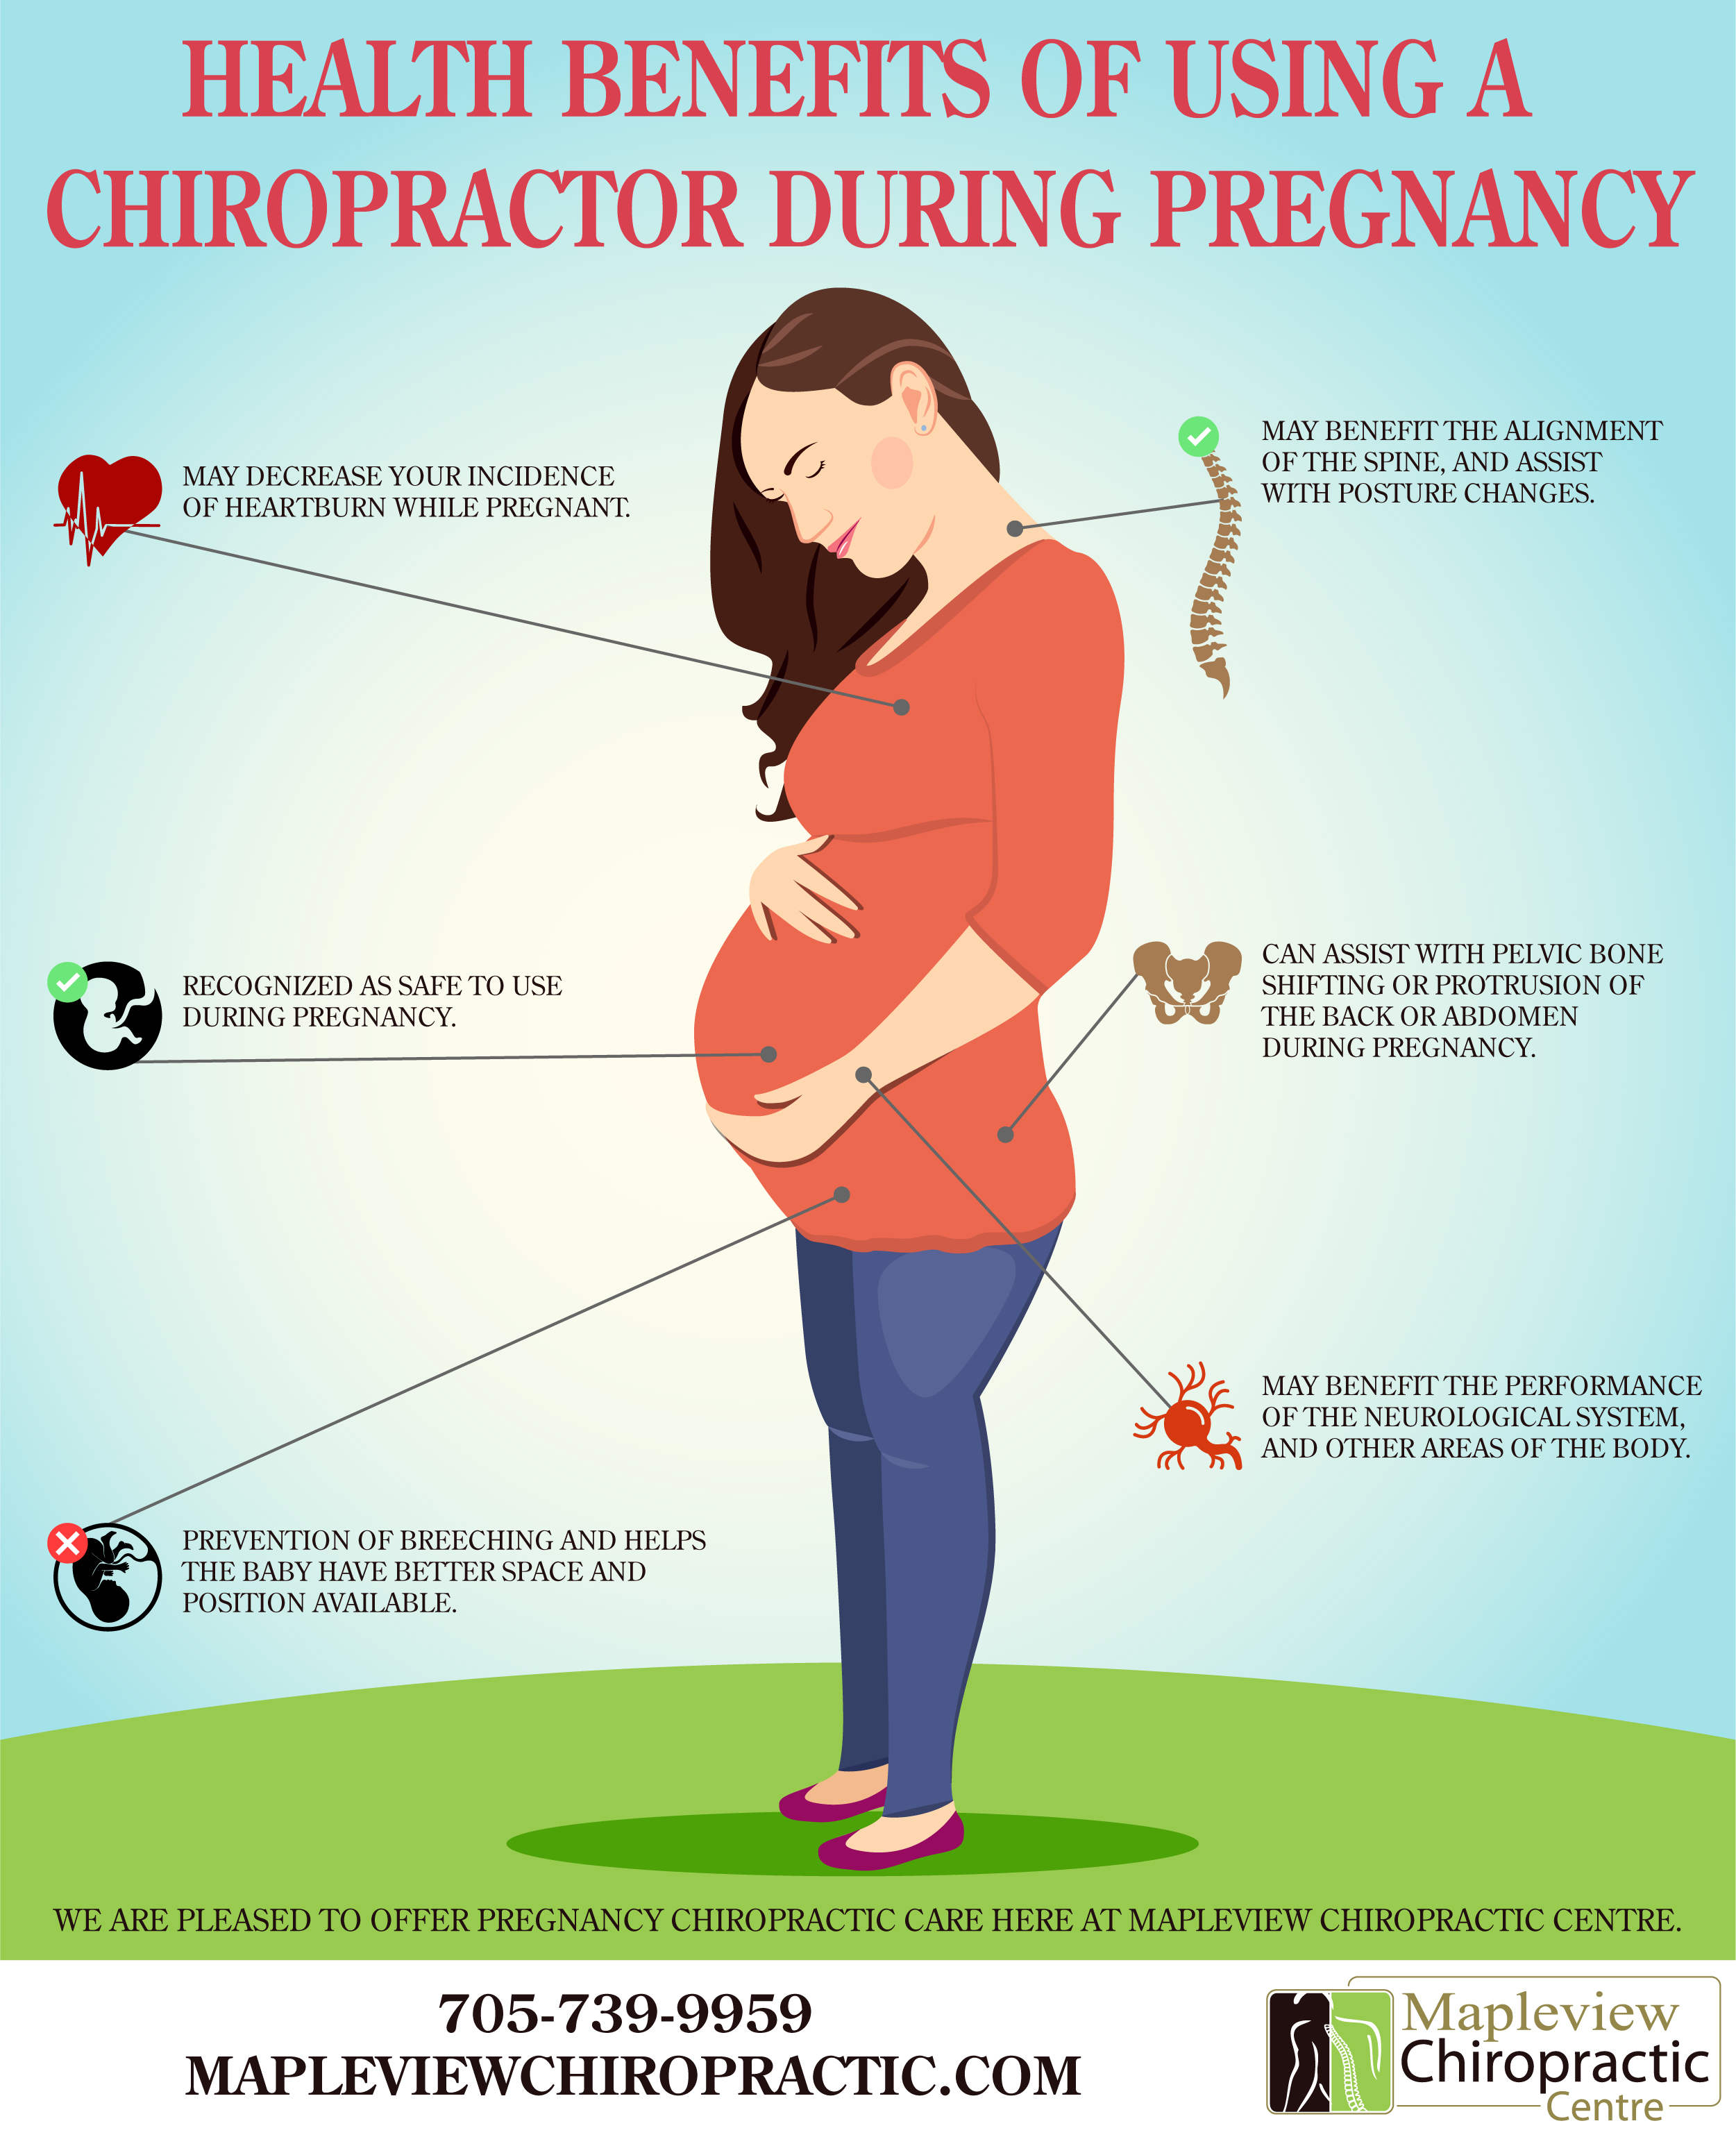 Have You Ever Considered Using a Pregnancy Chiropractor? | Mapleview